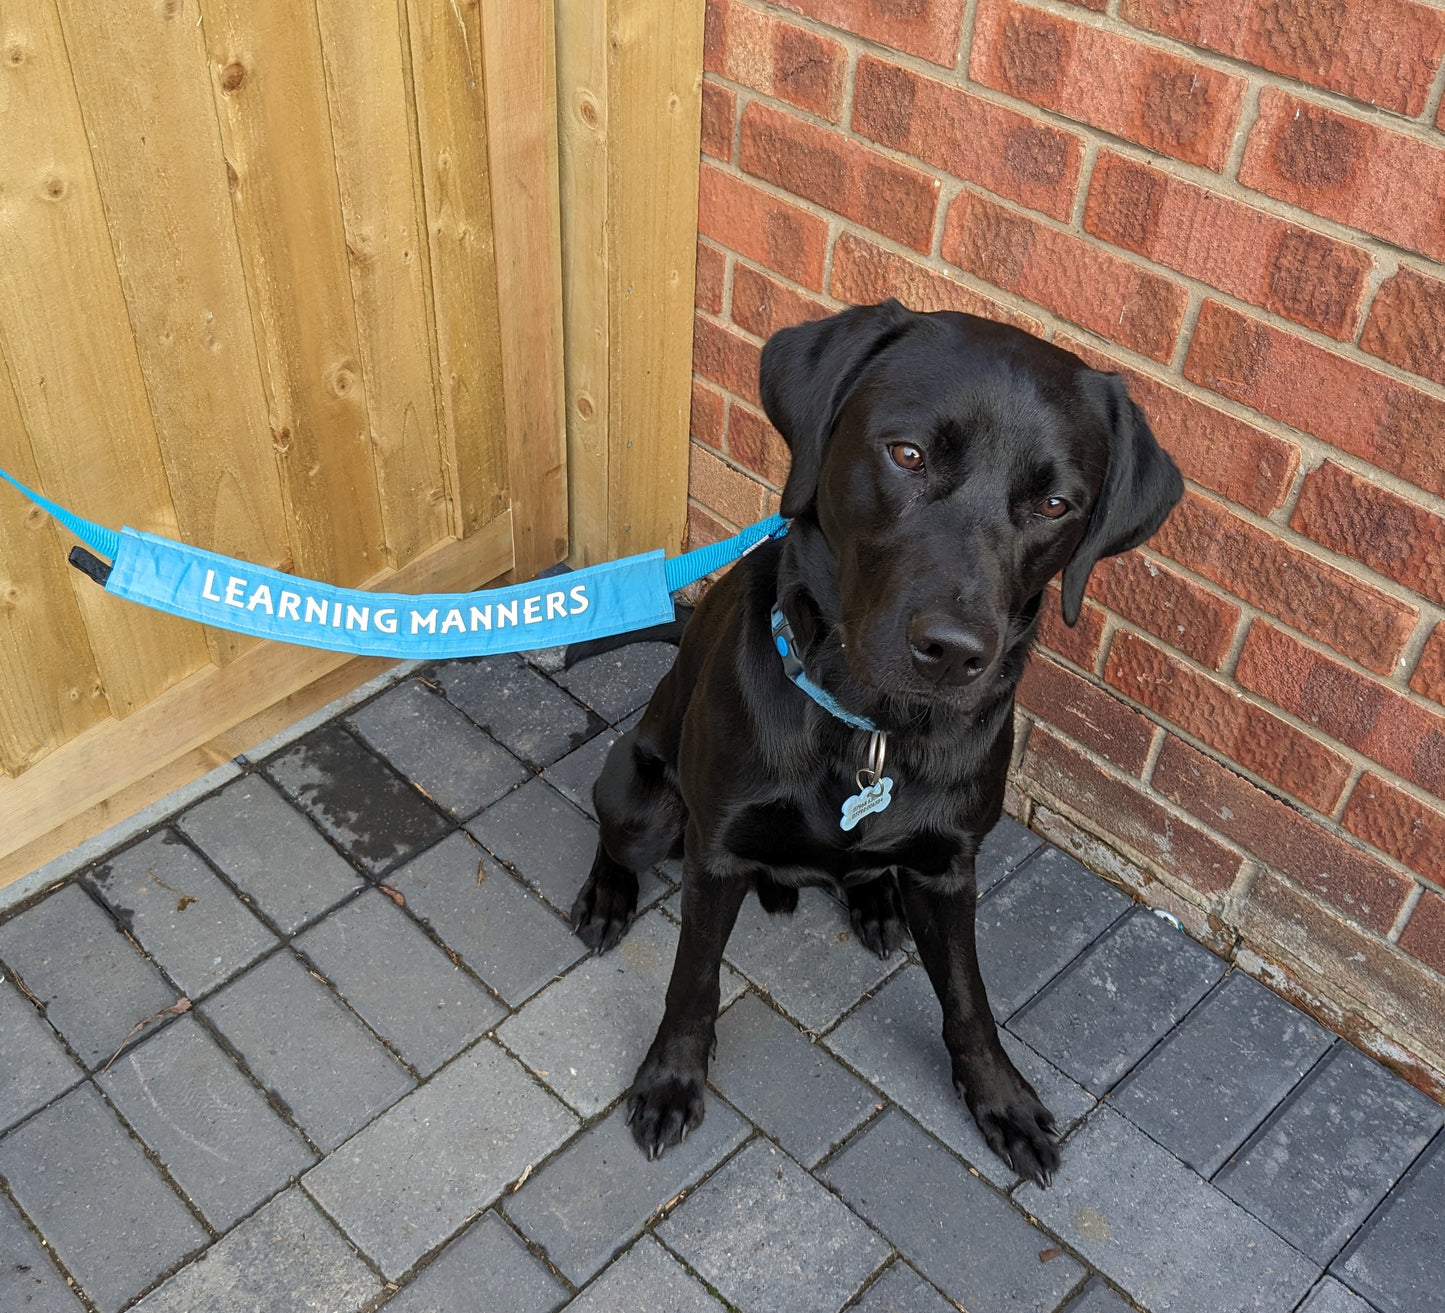 "LEARNING MANNERS" Dog lead sleeve / cover for dog leash - canine training - puppy socialising.